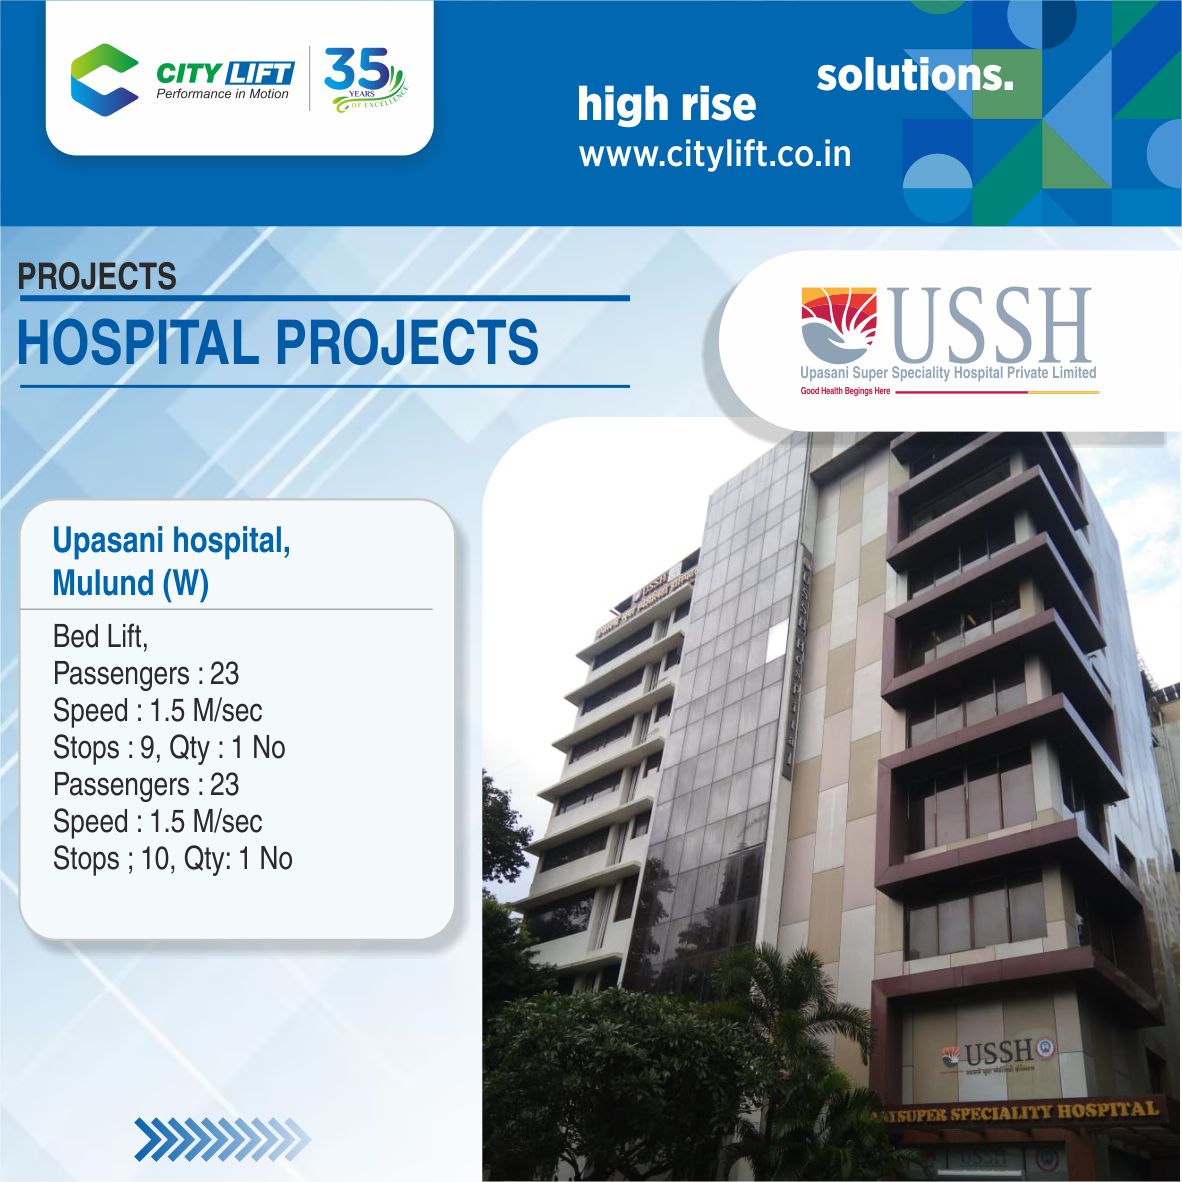 HOSPITAL PROJECTS